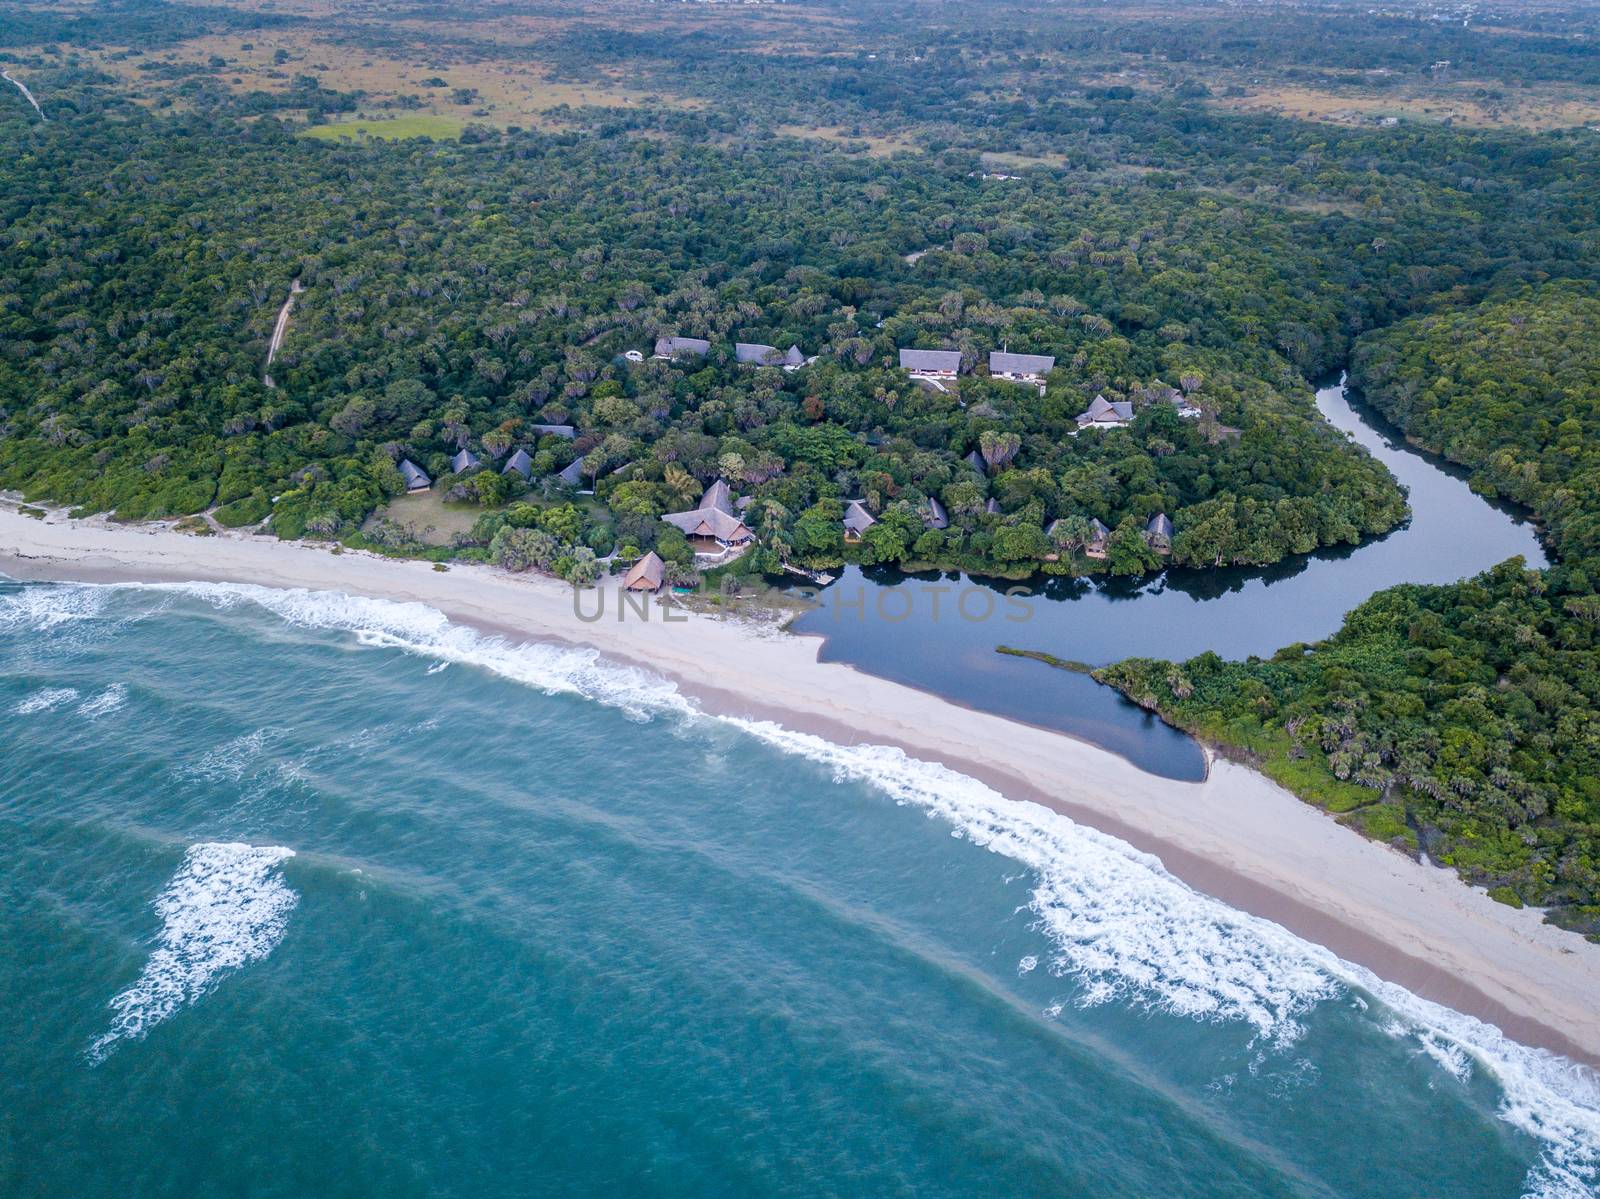 Drone picture of a hotel by a lagoon in a coastal forest on the Swahili Coast, Tanzania.